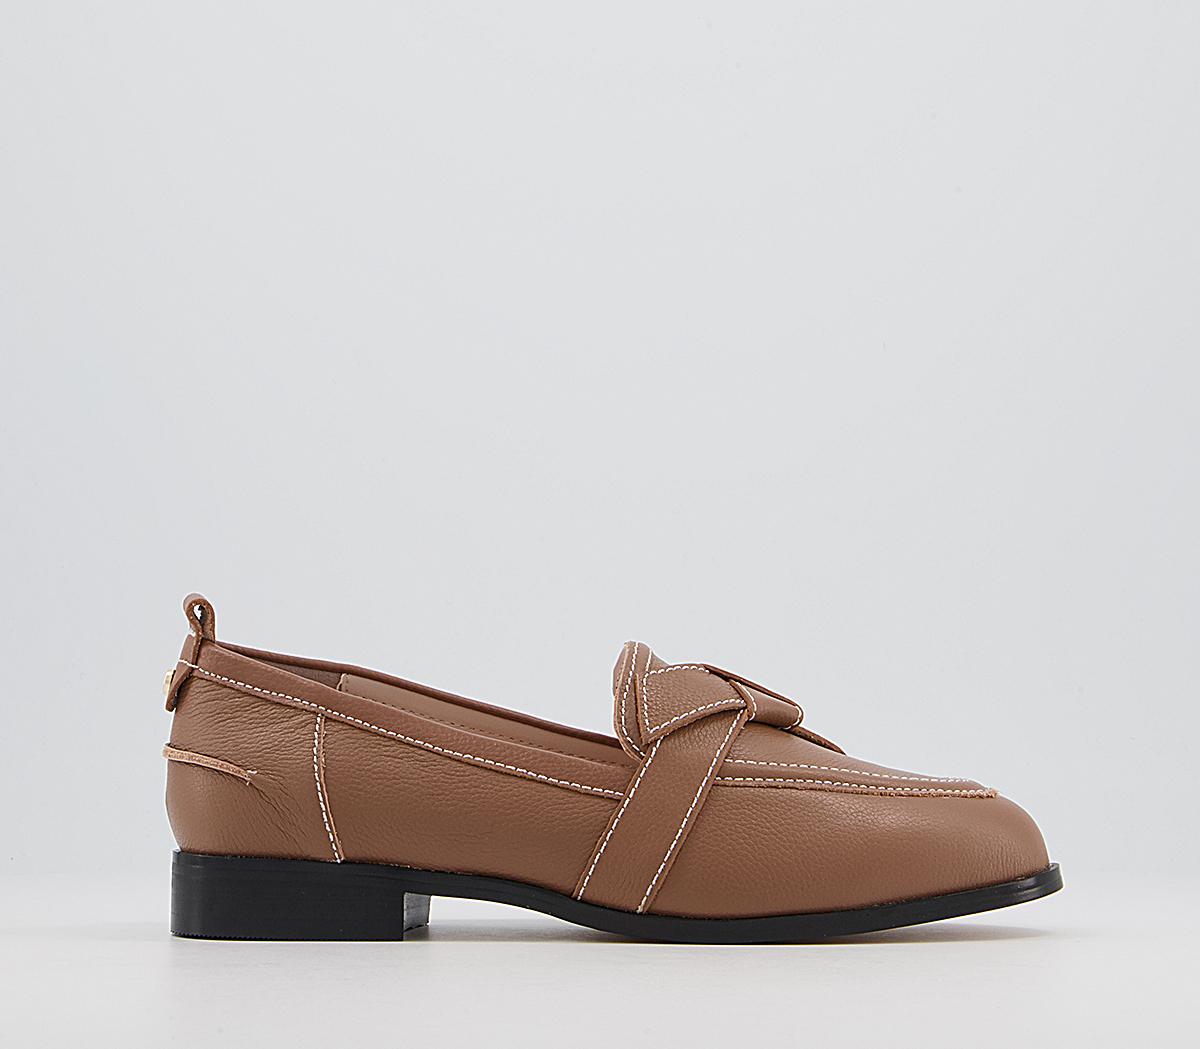 OFFICEFrancesca Feature Bow LoafersCamel Leather